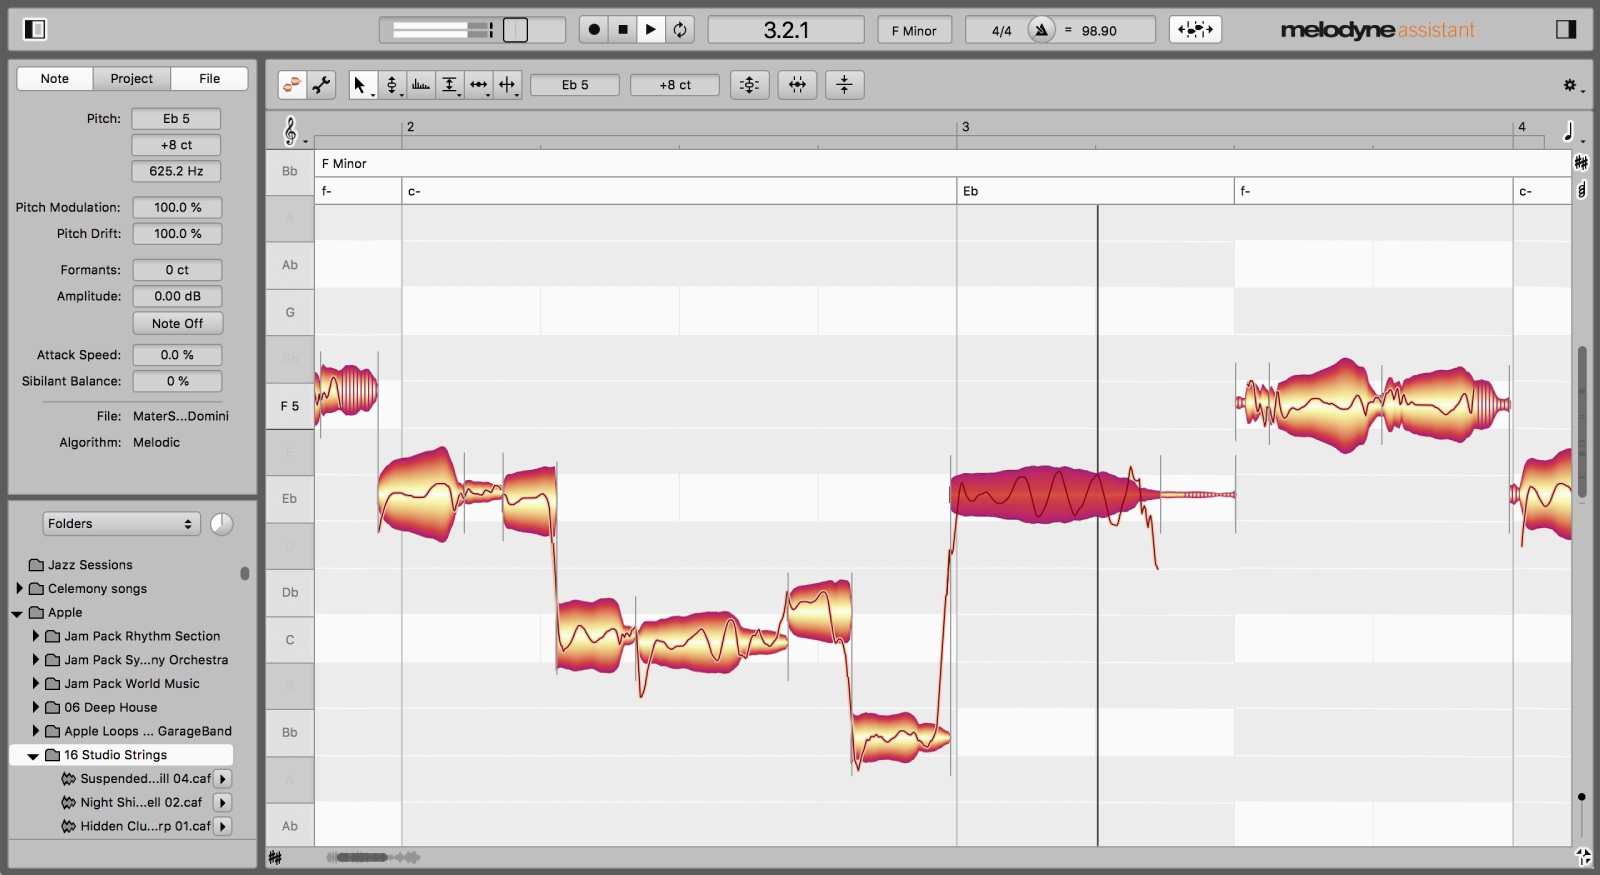 MELODYNE 5 ASSISTANT